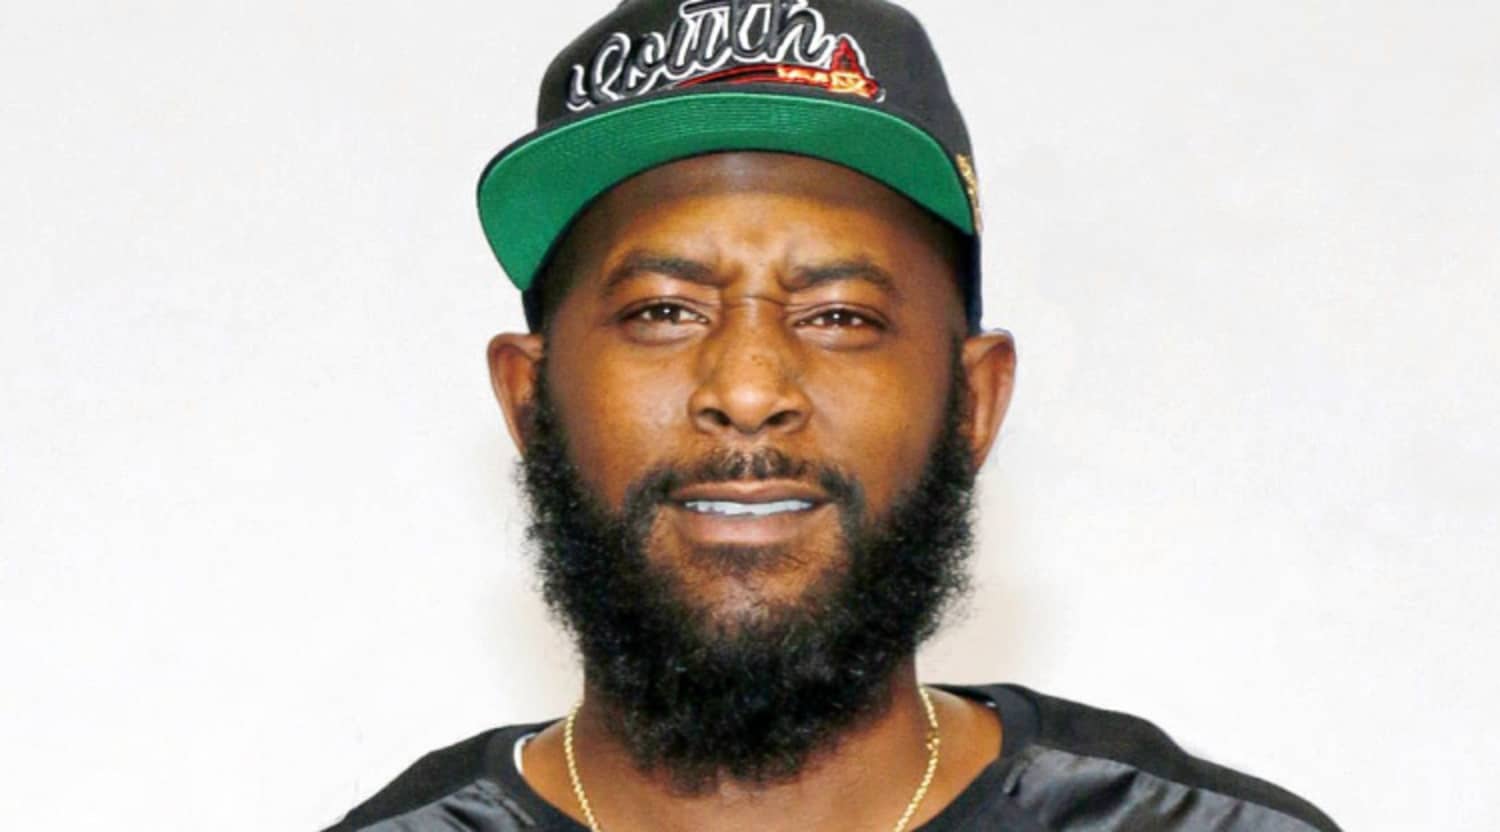 The 39-year old son of father (?) and mother(?) Karlous Miller in 2022 photo. Karlous Miller earned a  million dollar salary - leaving the net worth at  million in 2022